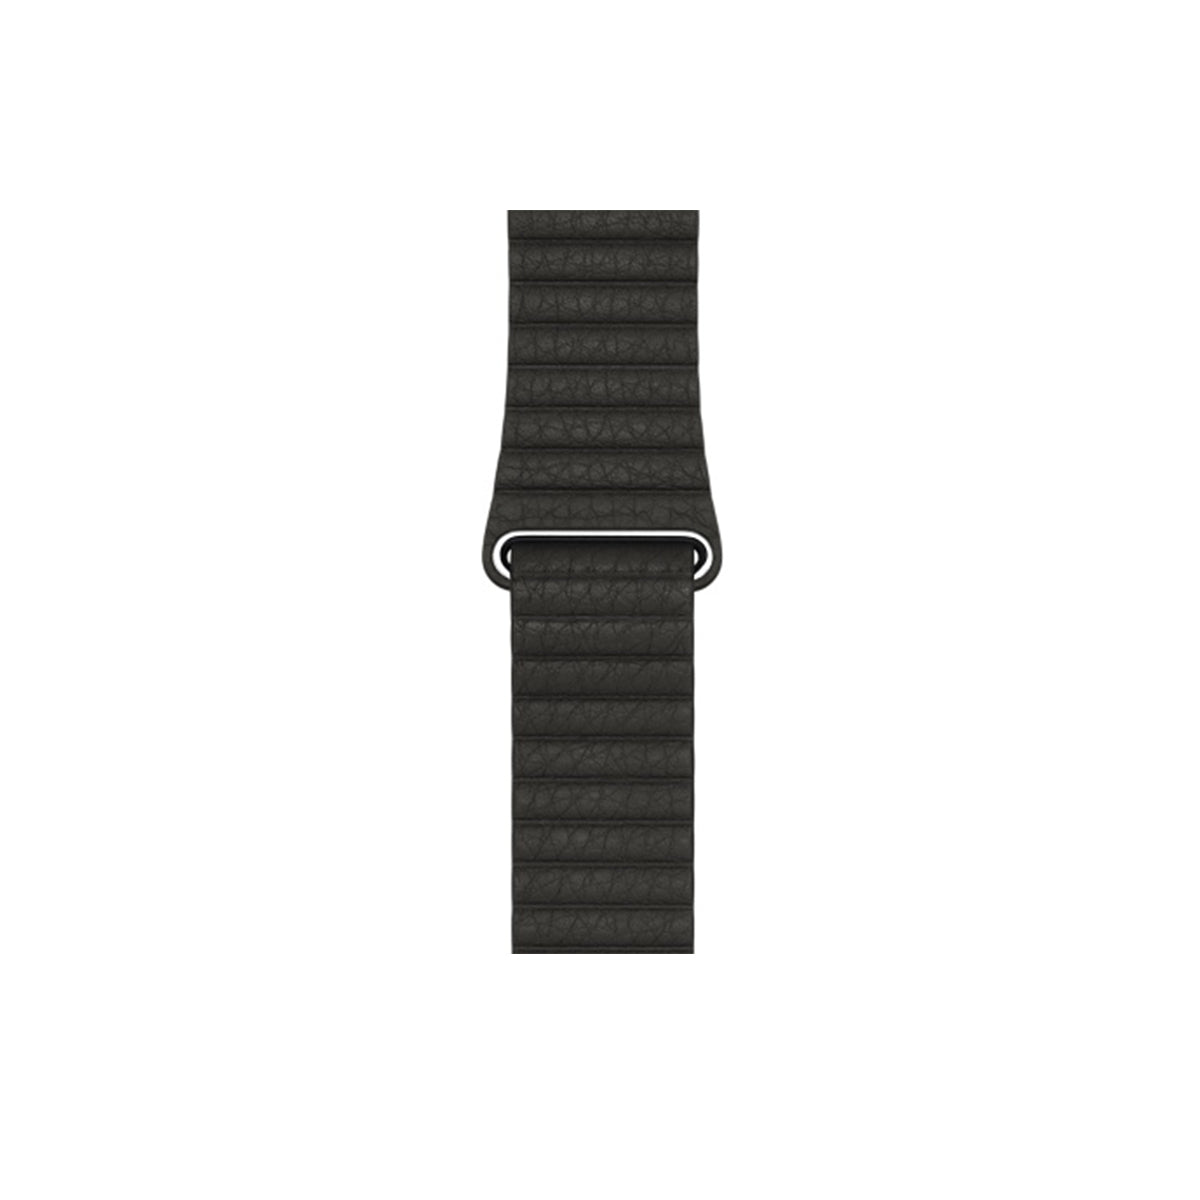 Magnetic Leather Loop Apple Watch Bands Replacement Strap   